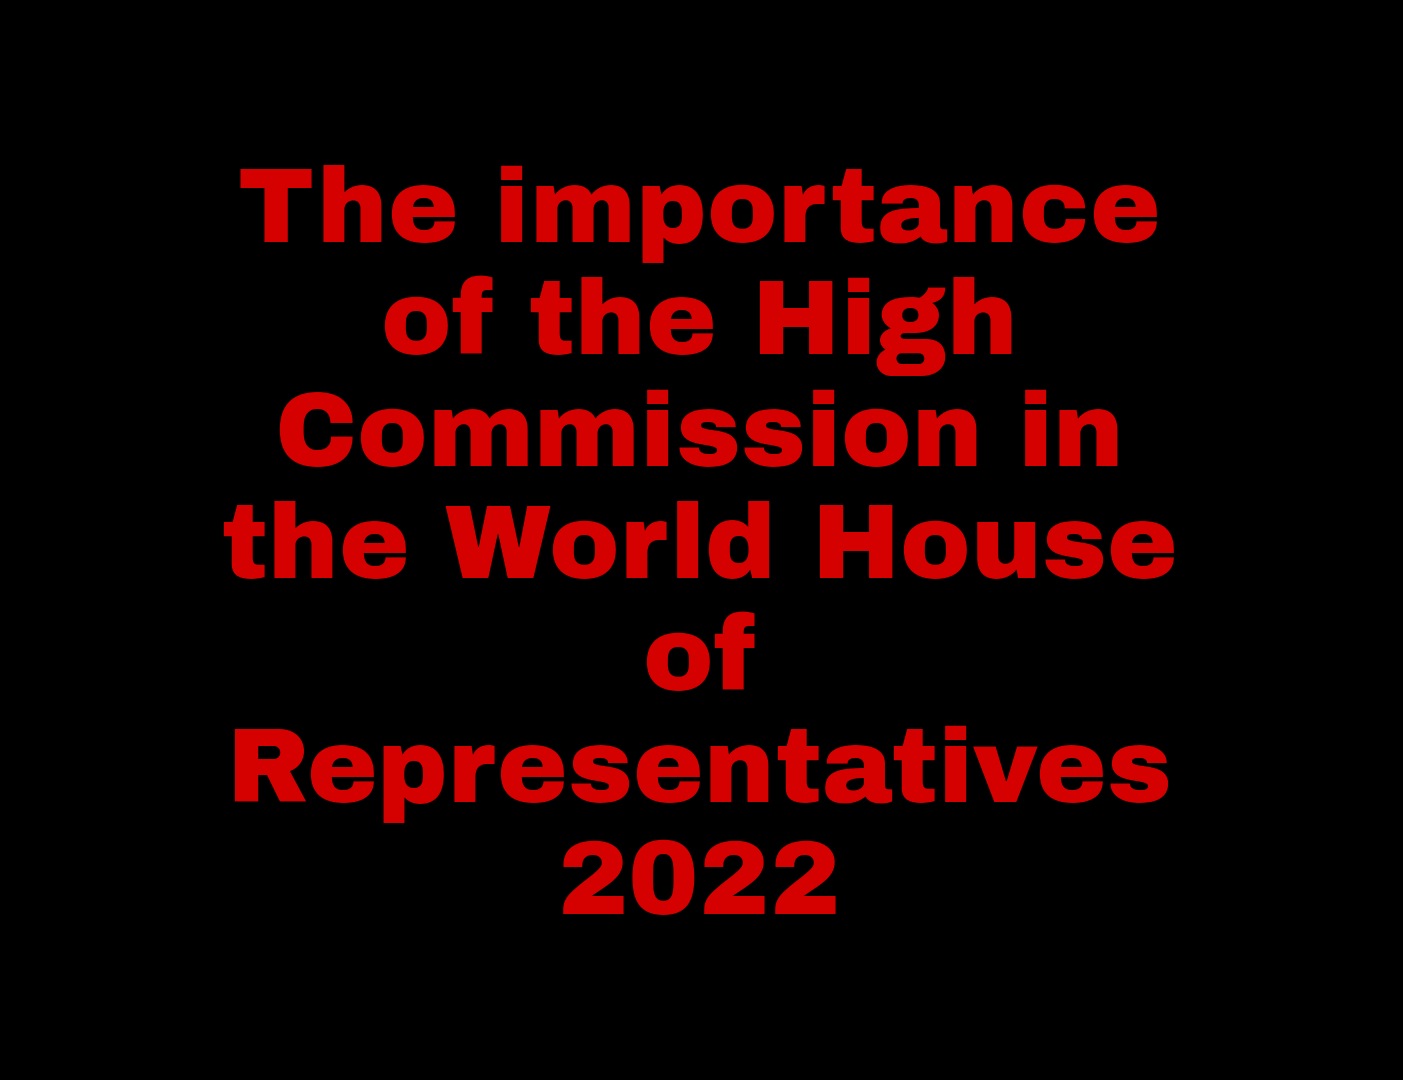 The importance of the High Commission in the World House of Representatives 2022